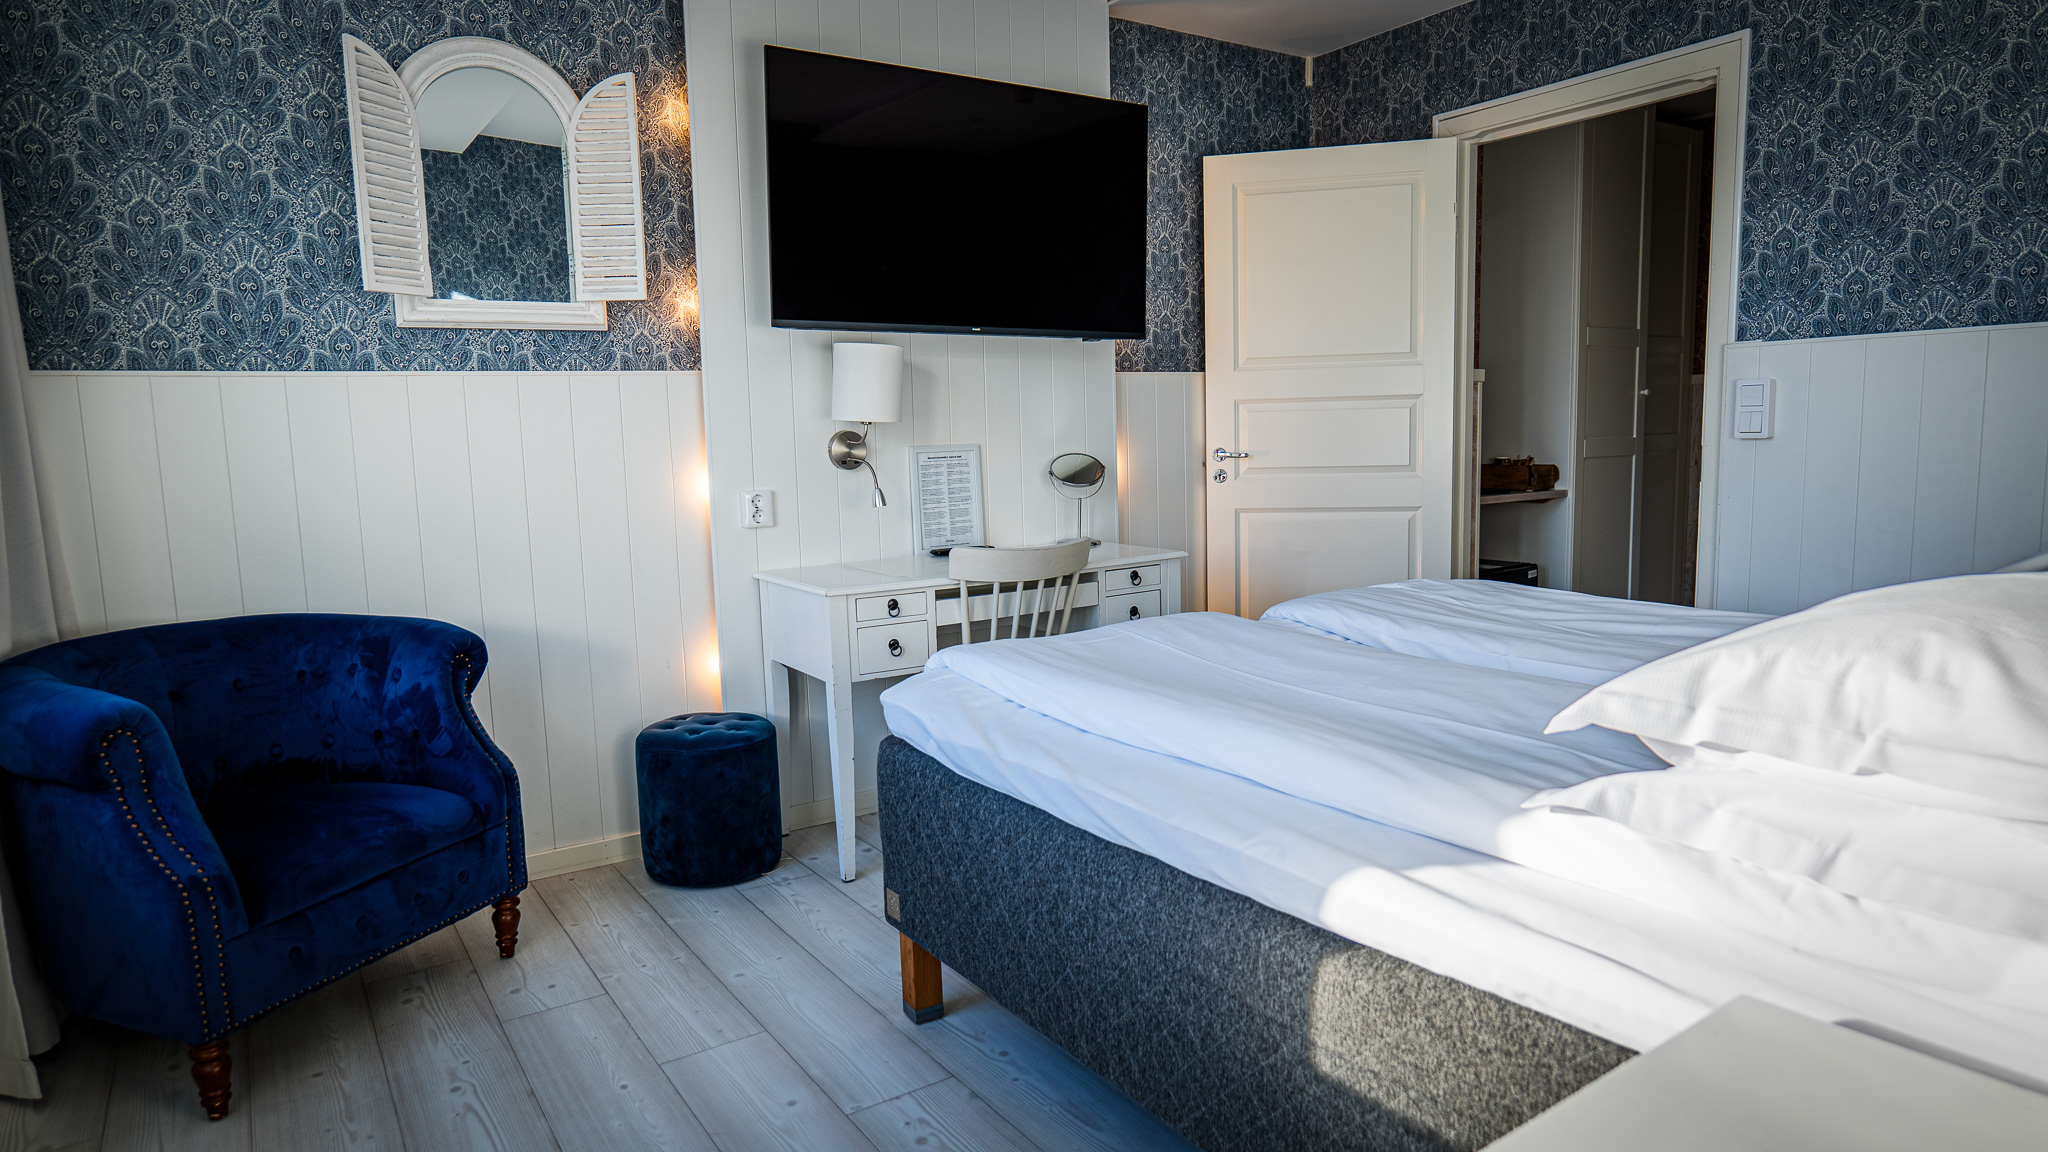 TomaszPikus 2 - Your Ultimate Guide to Sweden - LikeSweden.com - Havshotellet - cozy stay in Malmö not only for the Valentine's Day